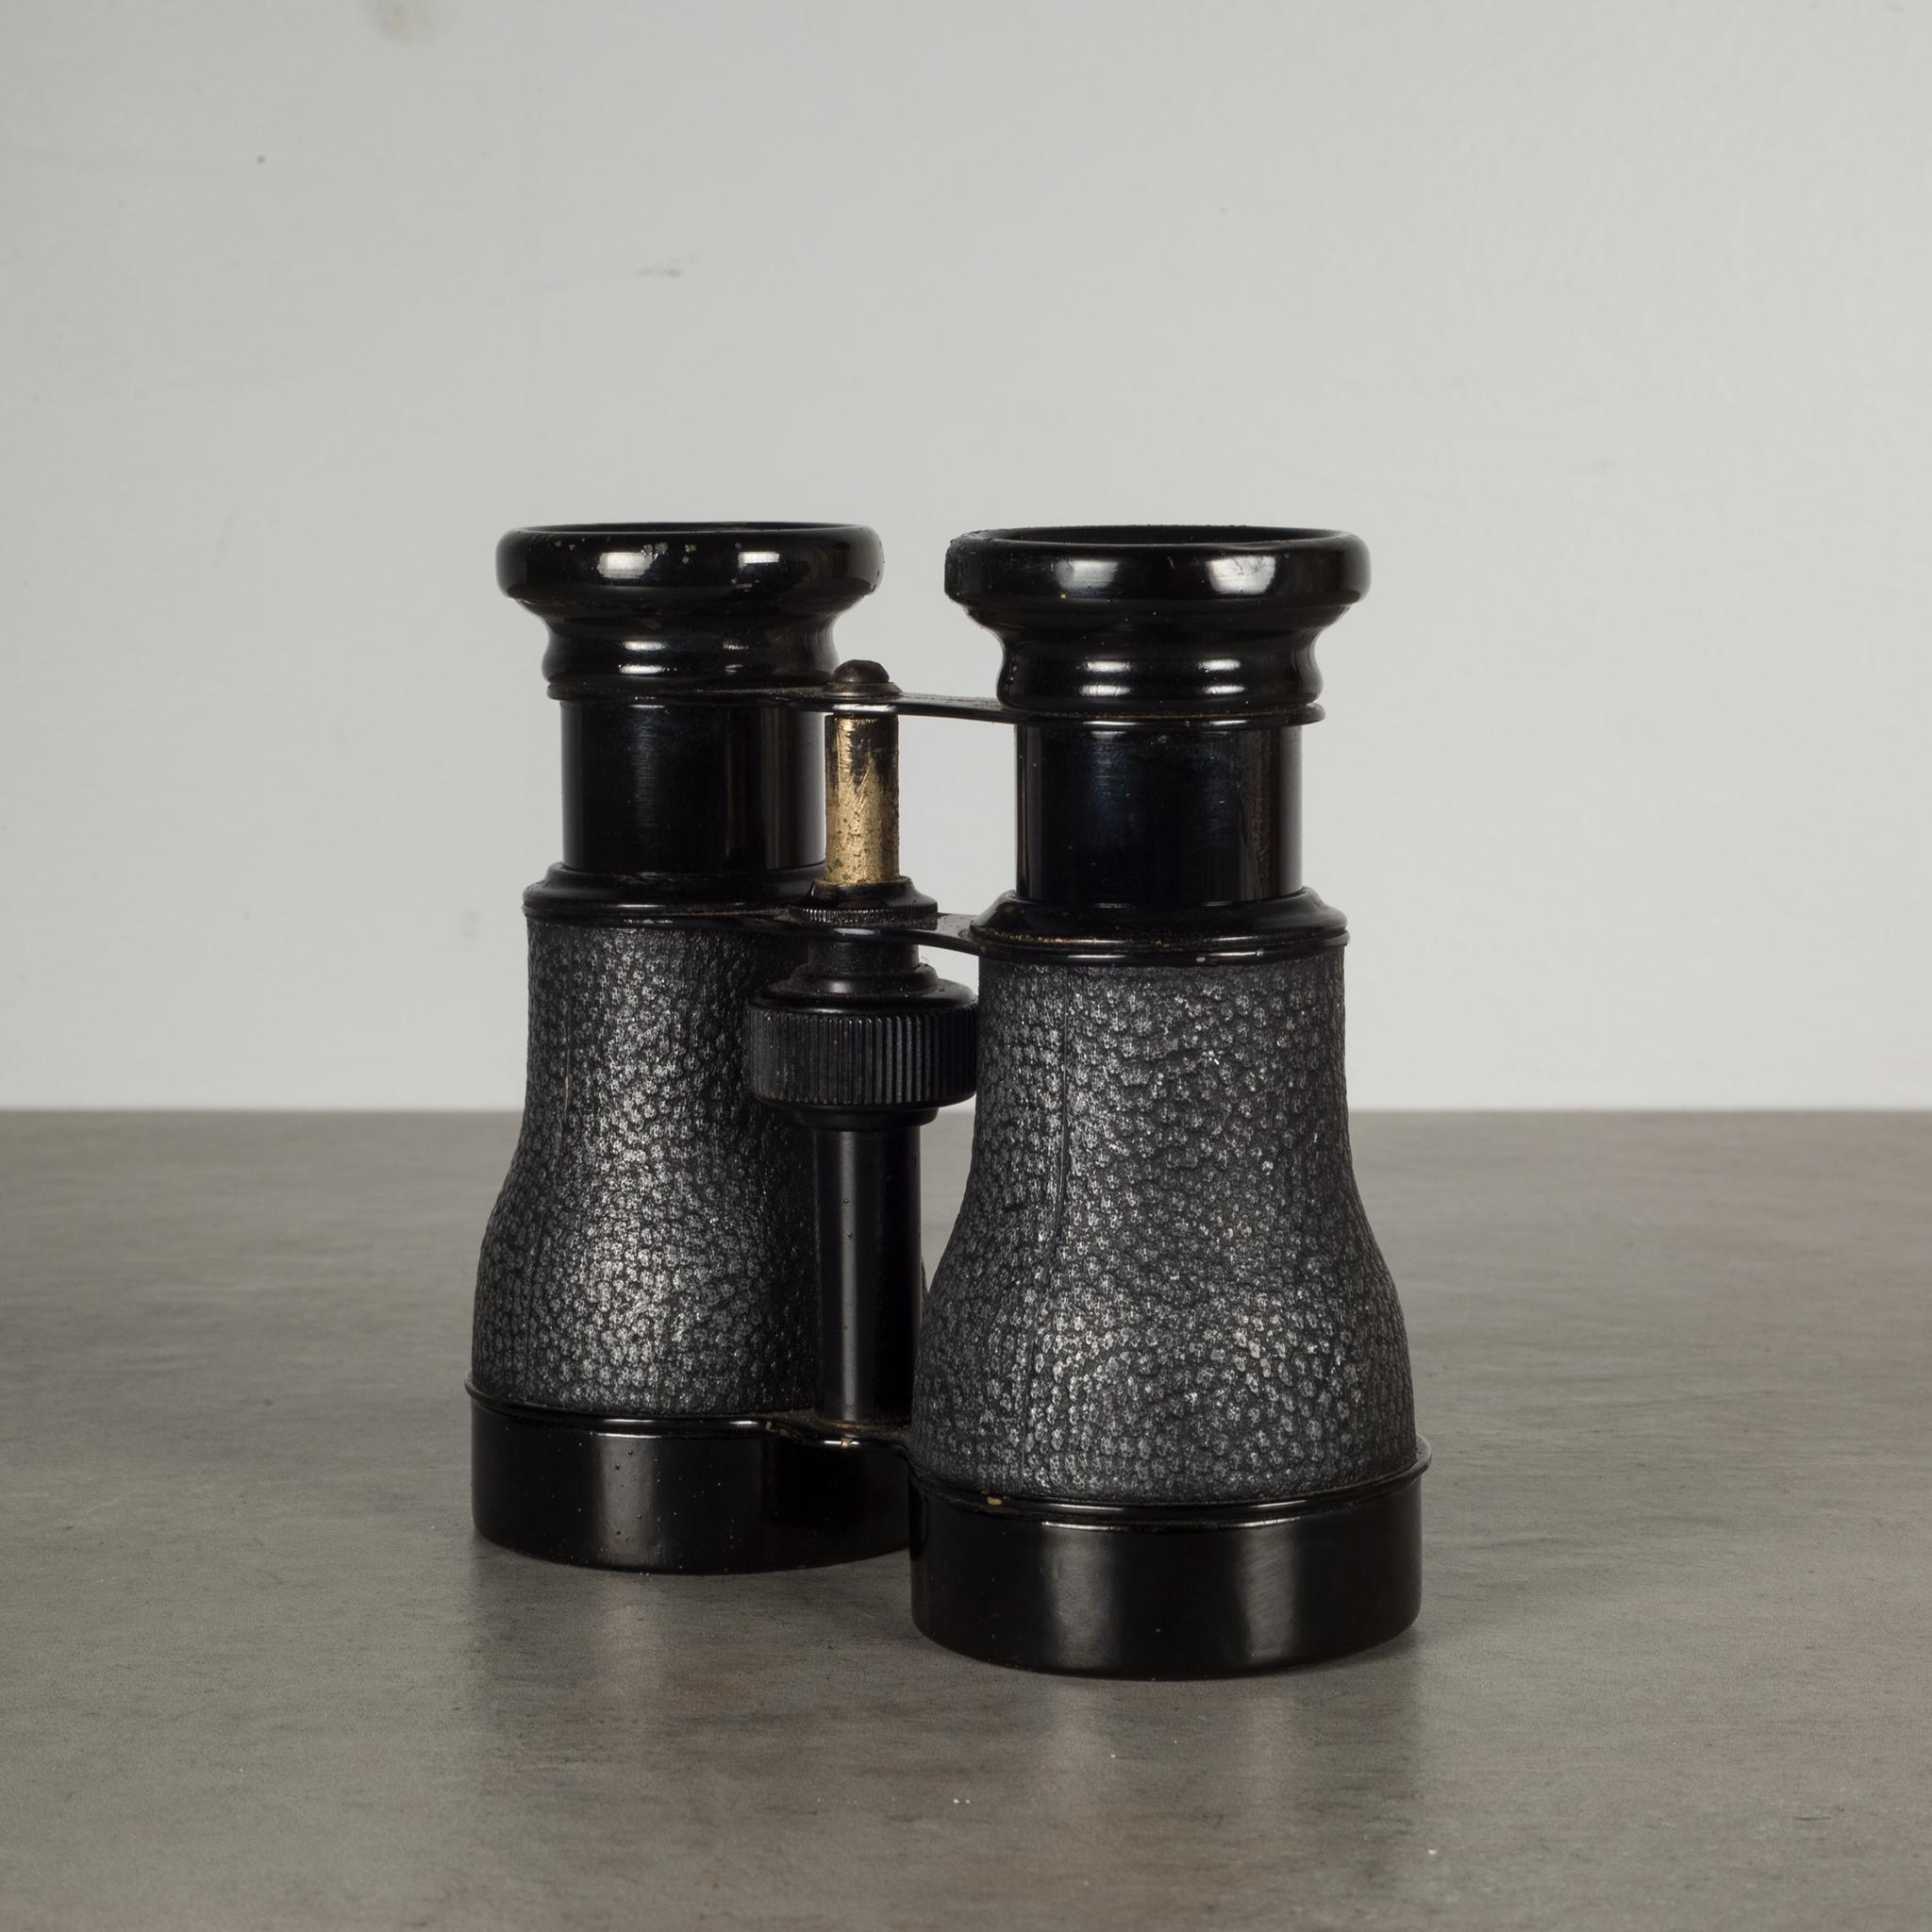 ABOUT

An original pair of faux Ostrich and enameled brass field binoculars. The objective lenses are clear and their optics are good. The metal focus wheel works but is very tight. The piece is in good condition with appropriate patina for its